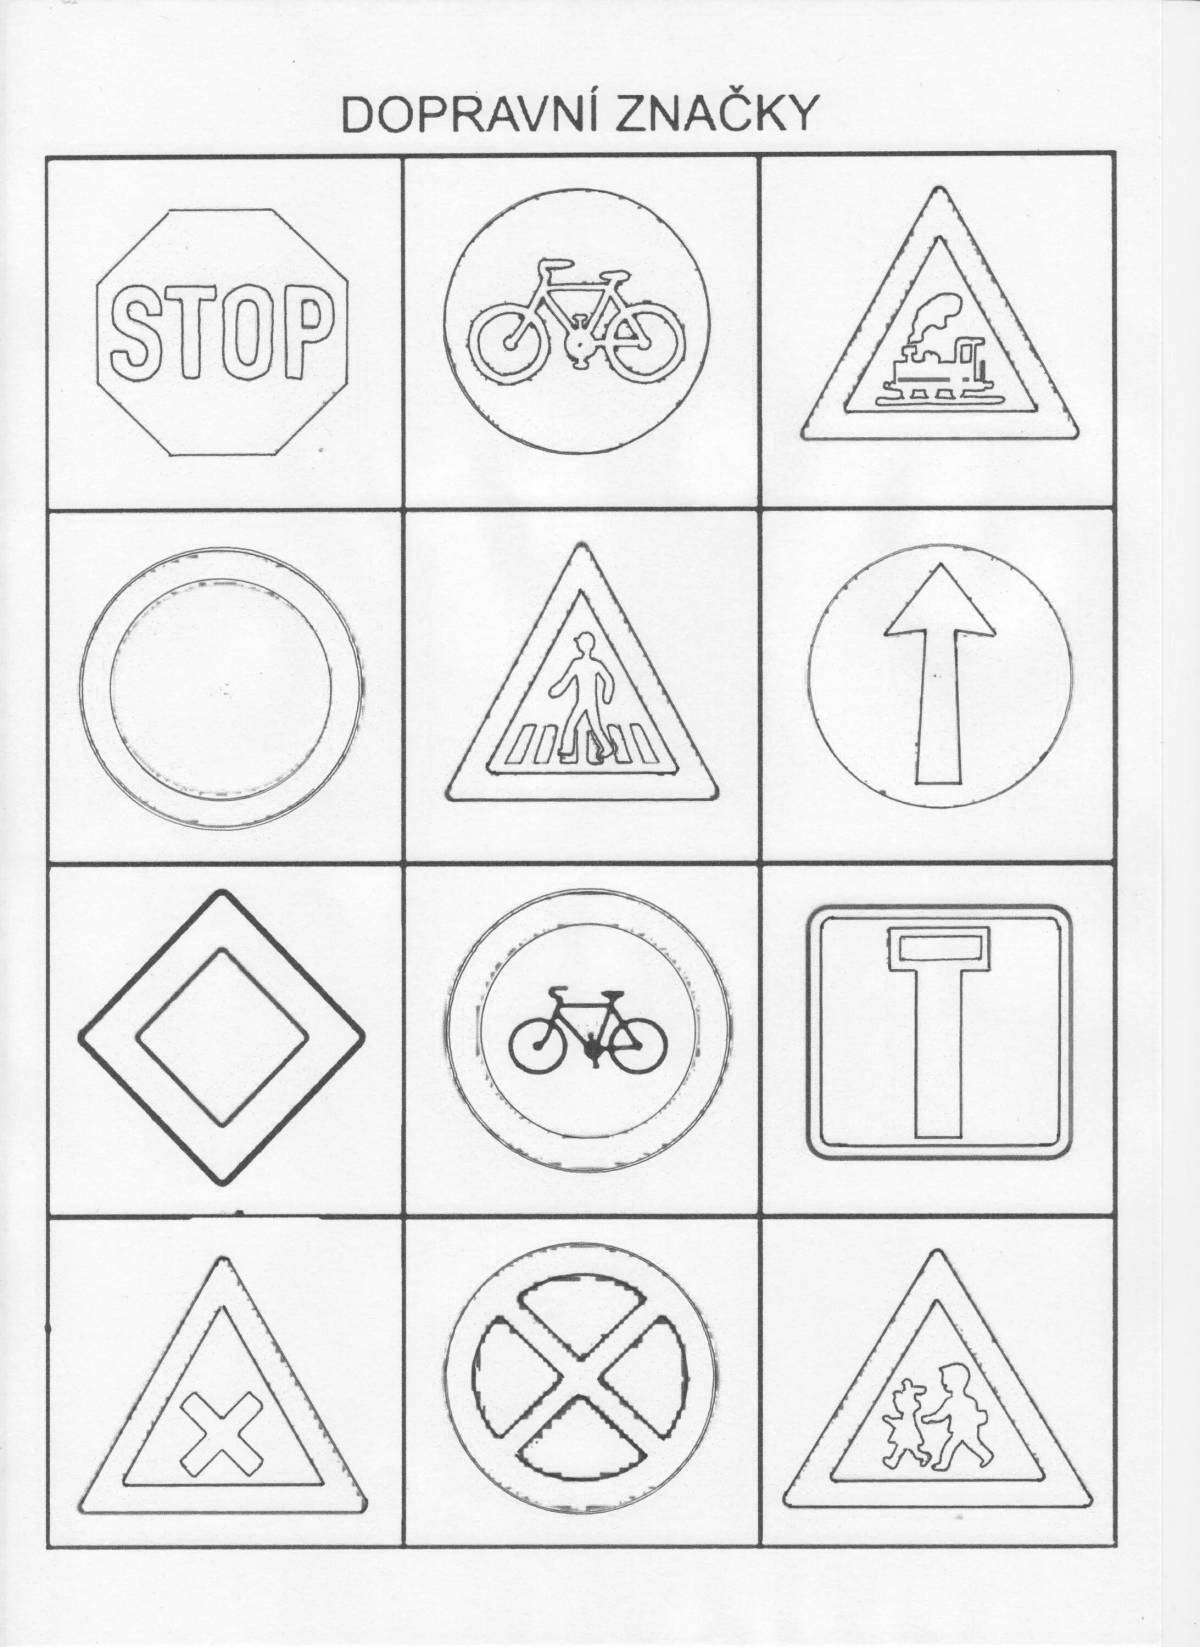 Adorable road signs coloring page